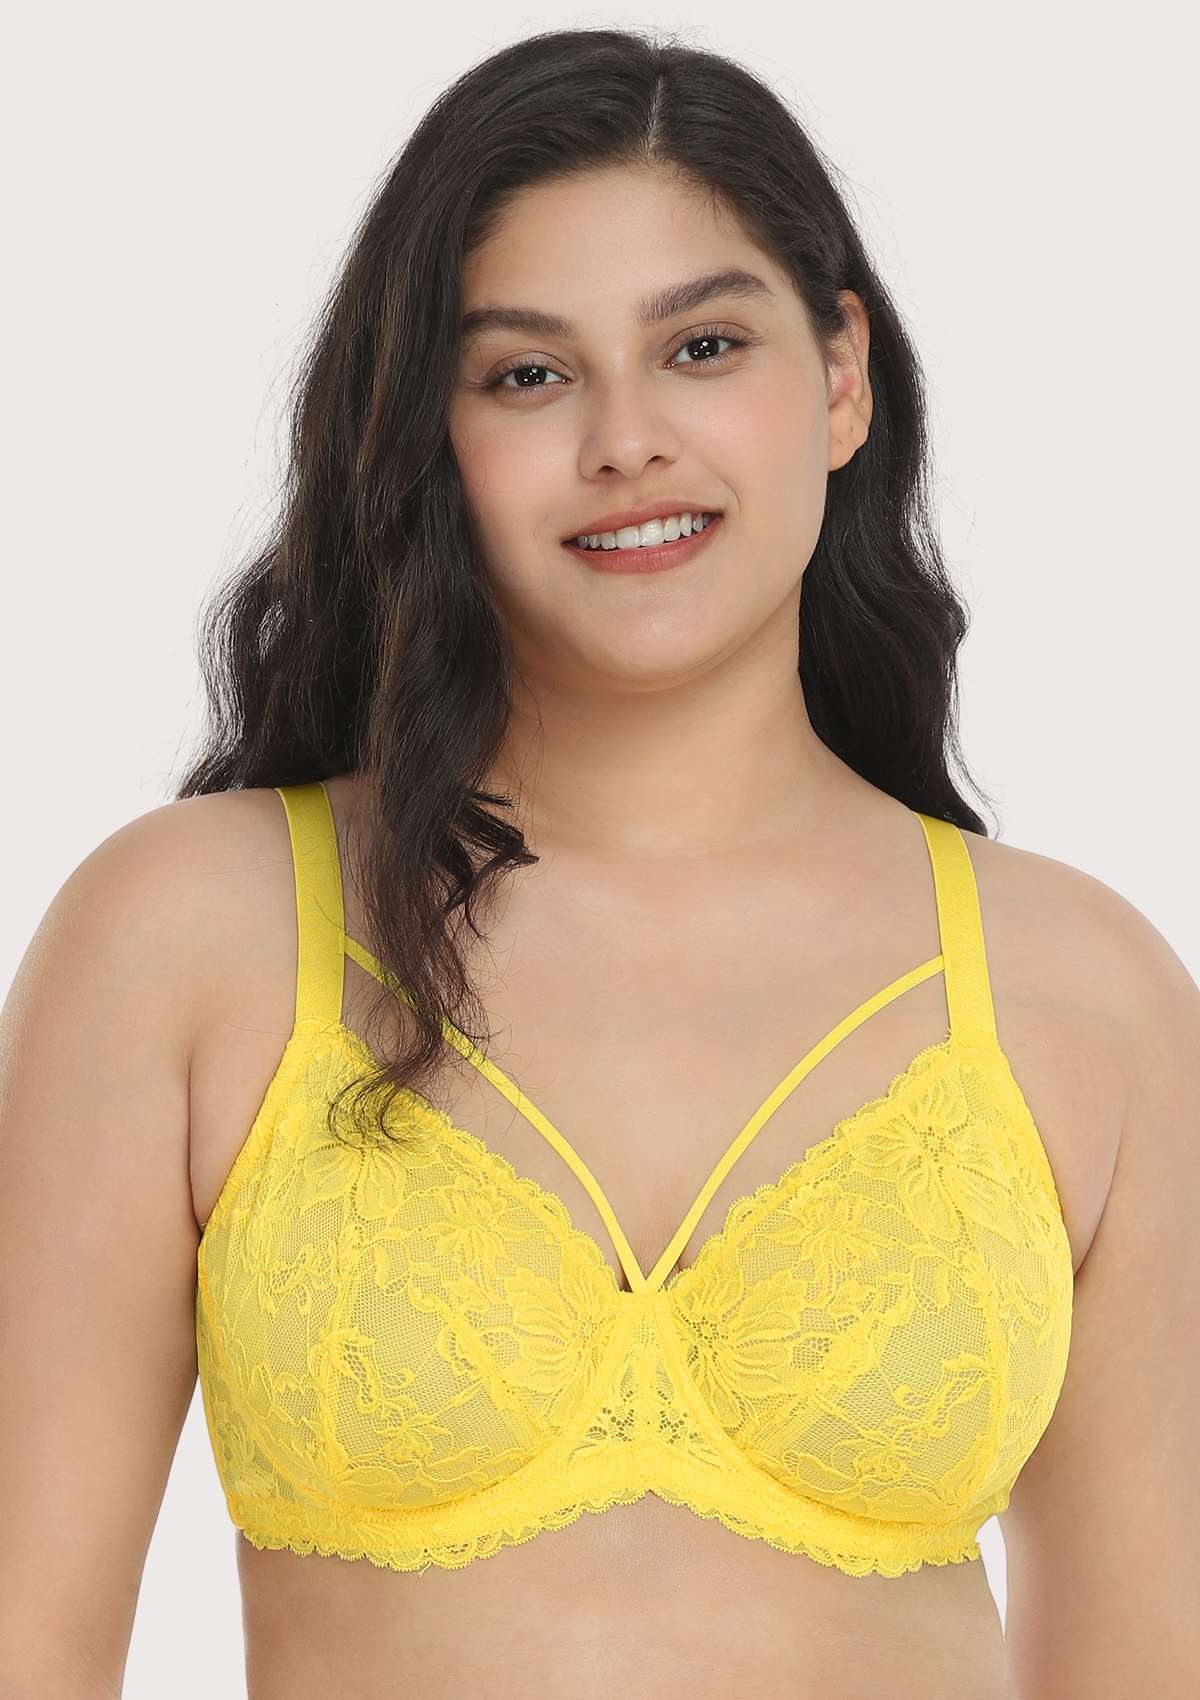 HSIA Unlined Lace Mesh Minimizer Bra For Large Breasts, Full Coverage - Bright Yellow / 44 / H